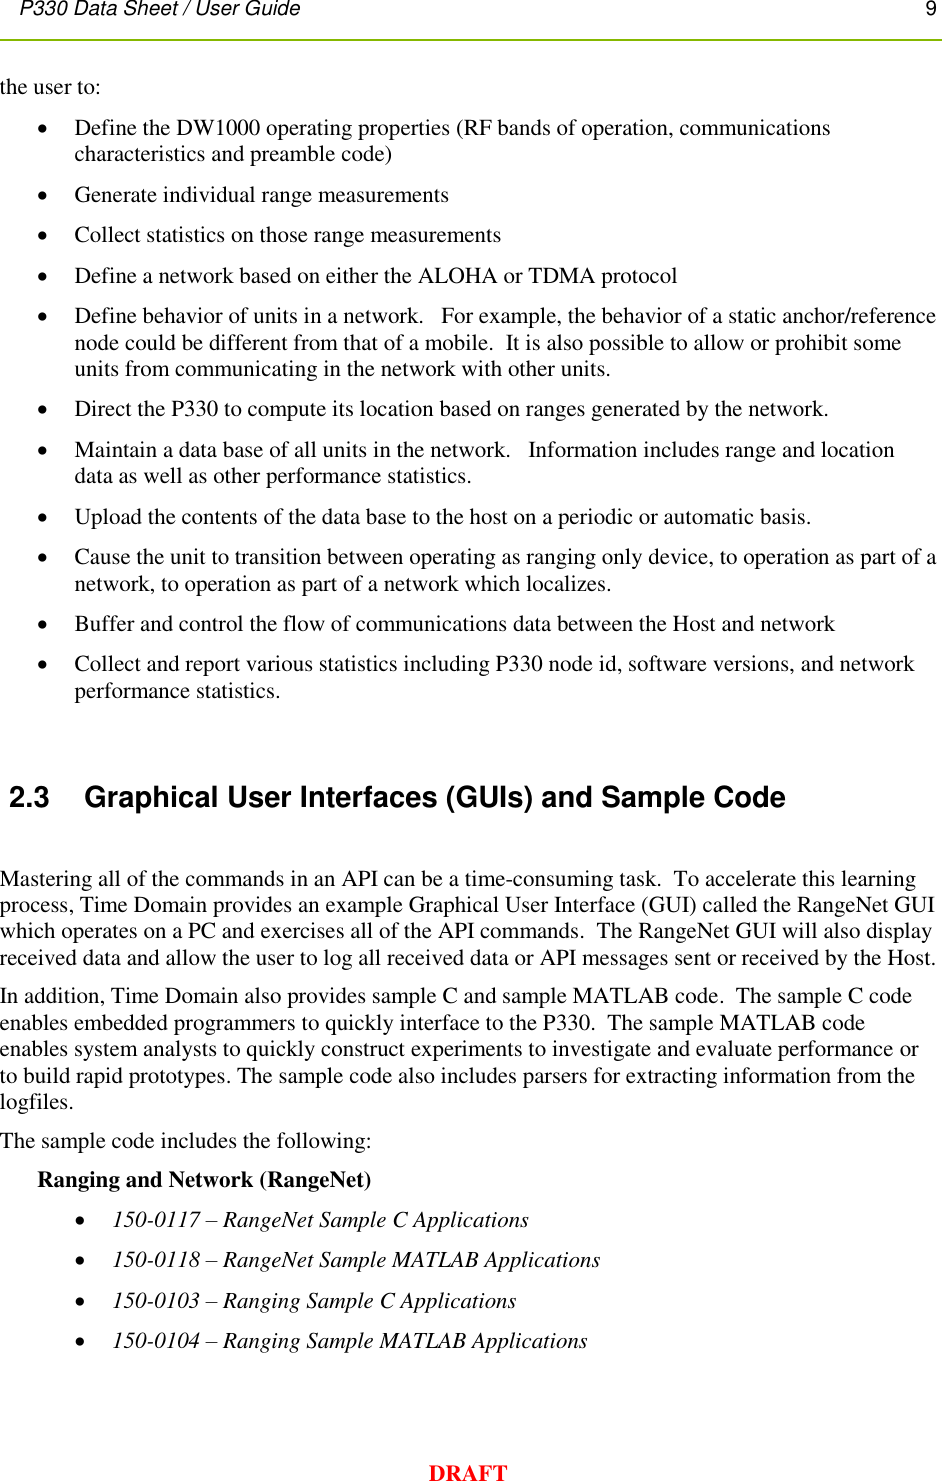 P330 Data Sheet / User Guide       9        DRAFT the user to:  Define the DW1000 operating properties (RF bands of operation, communications characteristics and preamble code)     Generate individual range measurements  Collect statistics on those range measurements  Define a network based on either the ALOHA or TDMA protocol  Define behavior of units in a network.   For example, the behavior of a static anchor/reference node could be different from that of a mobile.  It is also possible to allow or prohibit some units from communicating in the network with other units.  Direct the P330 to compute its location based on ranges generated by the network.  Maintain a data base of all units in the network.   Information includes range and location data as well as other performance statistics.  Upload the contents of the data base to the host on a periodic or automatic basis.  Cause the unit to transition between operating as ranging only device, to operation as part of a network, to operation as part of a network which localizes.  Buffer and control the flow of communications data between the Host and network  Collect and report various statistics including P330 node id, software versions, and network performance statistics.   2.3  Graphical User Interfaces (GUIs) and Sample Code  Mastering all of the commands in an API can be a time-consuming task.  To accelerate this learning process, Time Domain provides an example Graphical User Interface (GUI) called the RangeNet GUI which operates on a PC and exercises all of the API commands.  The RangeNet GUI will also display received data and allow the user to log all received data or API messages sent or received by the Host.   In addition, Time Domain also provides sample C and sample MATLAB code.  The sample C code enables embedded programmers to quickly interface to the P330.  The sample MATLAB code enables system analysts to quickly construct experiments to investigate and evaluate performance or to build rapid prototypes. The sample code also includes parsers for extracting information from the logfiles.   The sample code includes the following: Ranging and Network (RangeNet)  150-0117 – RangeNet Sample C Applications  150-0118 – RangeNet Sample MATLAB Applications  150-0103 – Ranging Sample C Applications  150-0104 – Ranging Sample MATLAB Applications  